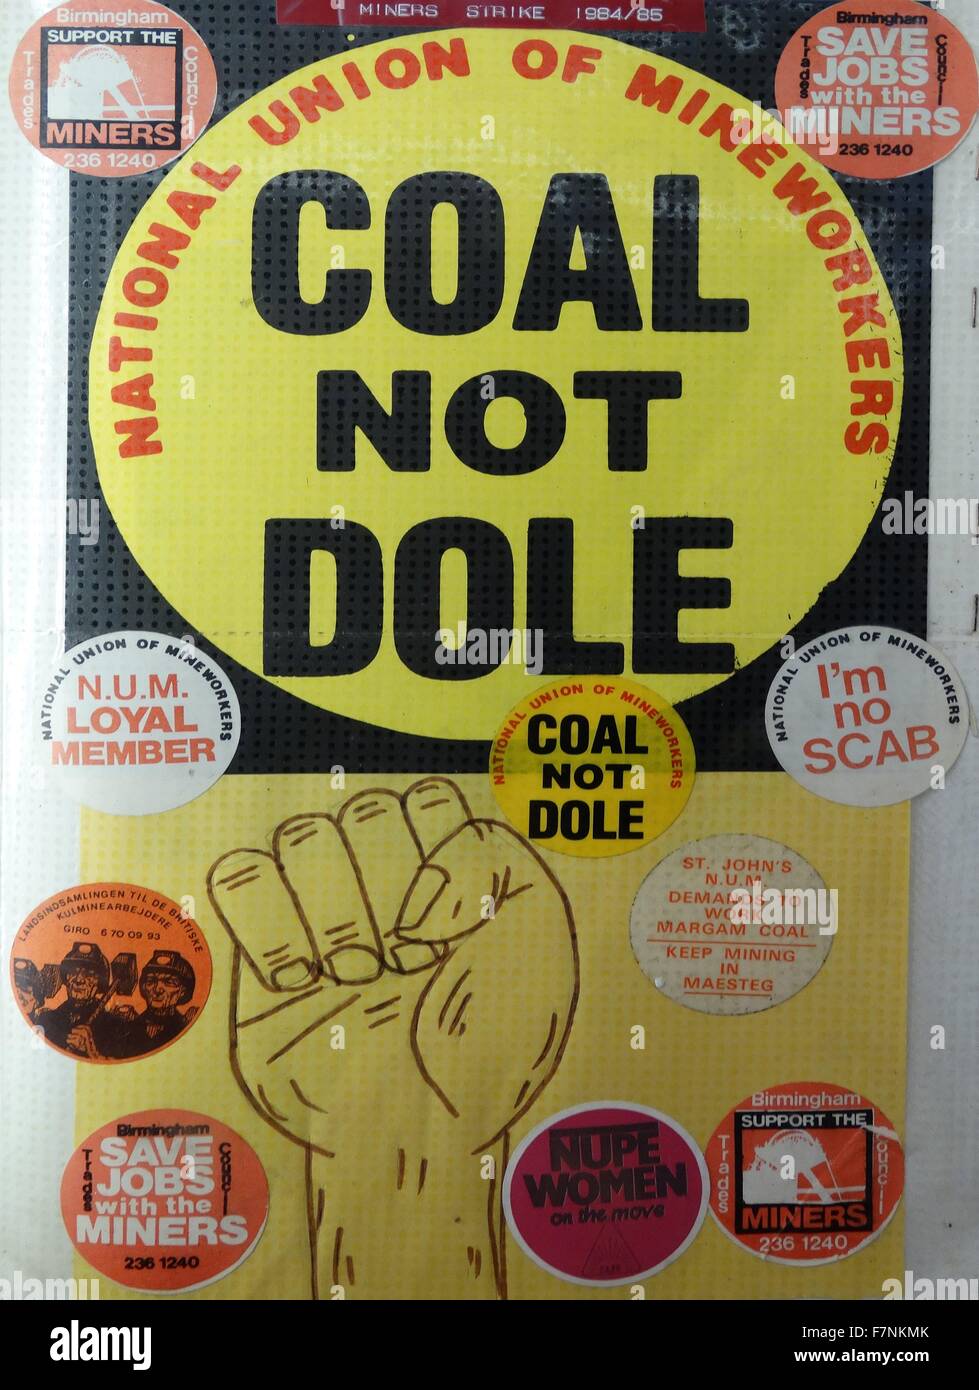 adhessive labels and badges of support for the British Miners strike of 1984-1985. At the end of the strike the National Union of Miners was left weakened and mining communities divided between supporters and opponents of the industrial action 1985 Stock Photo